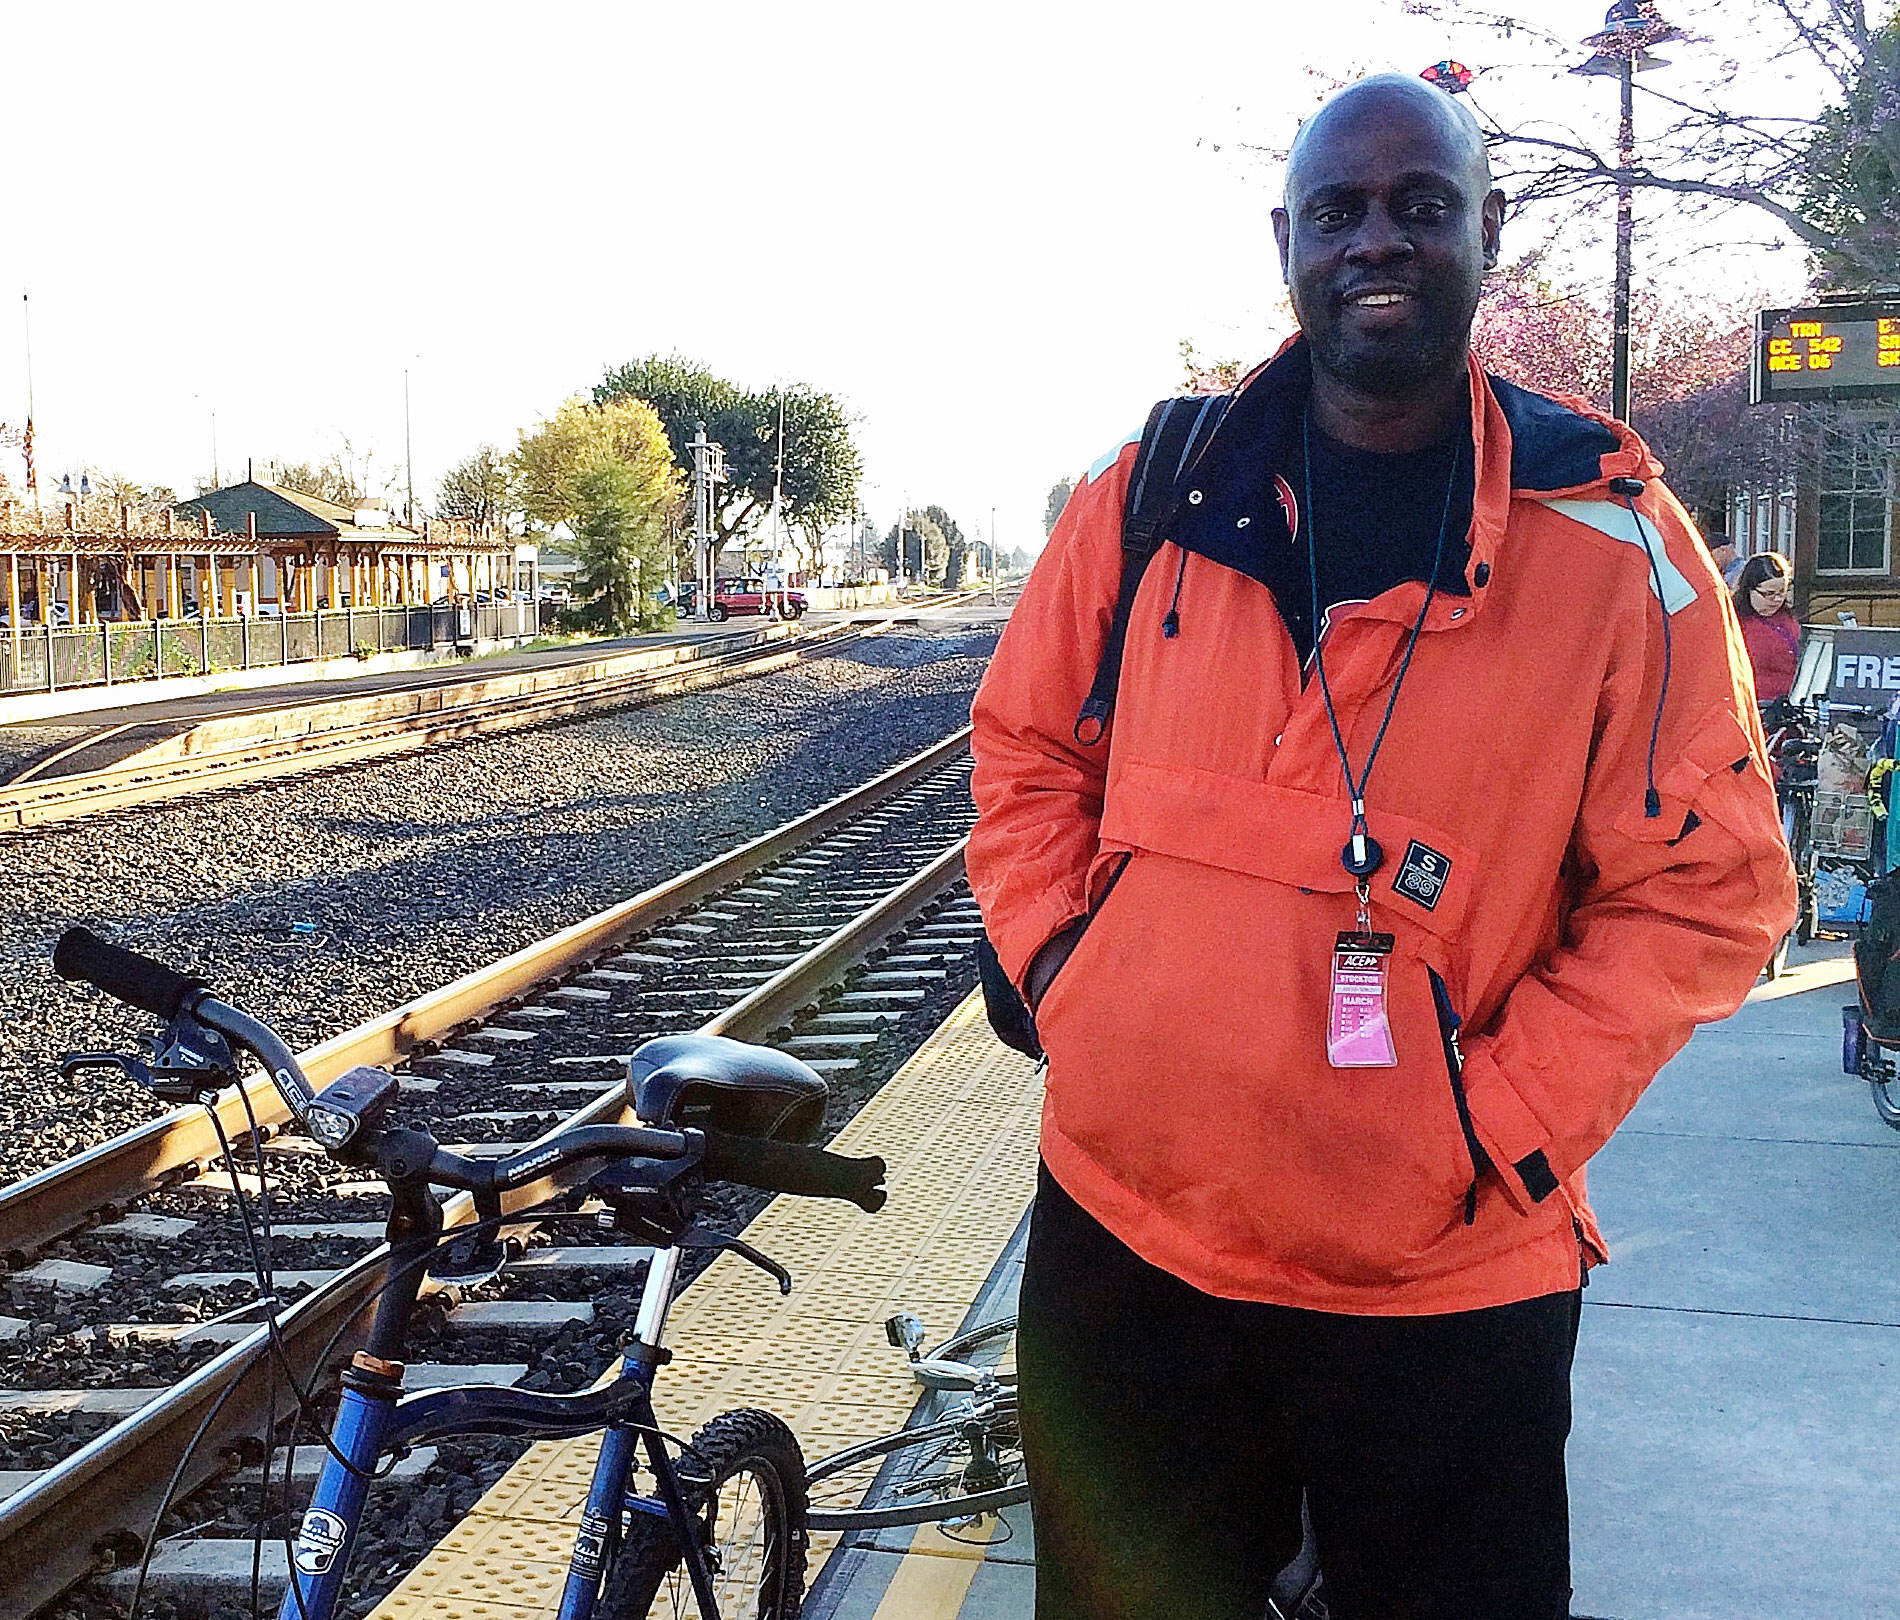 Thomas waits for the Stanford commuter bus at Fremont train station.